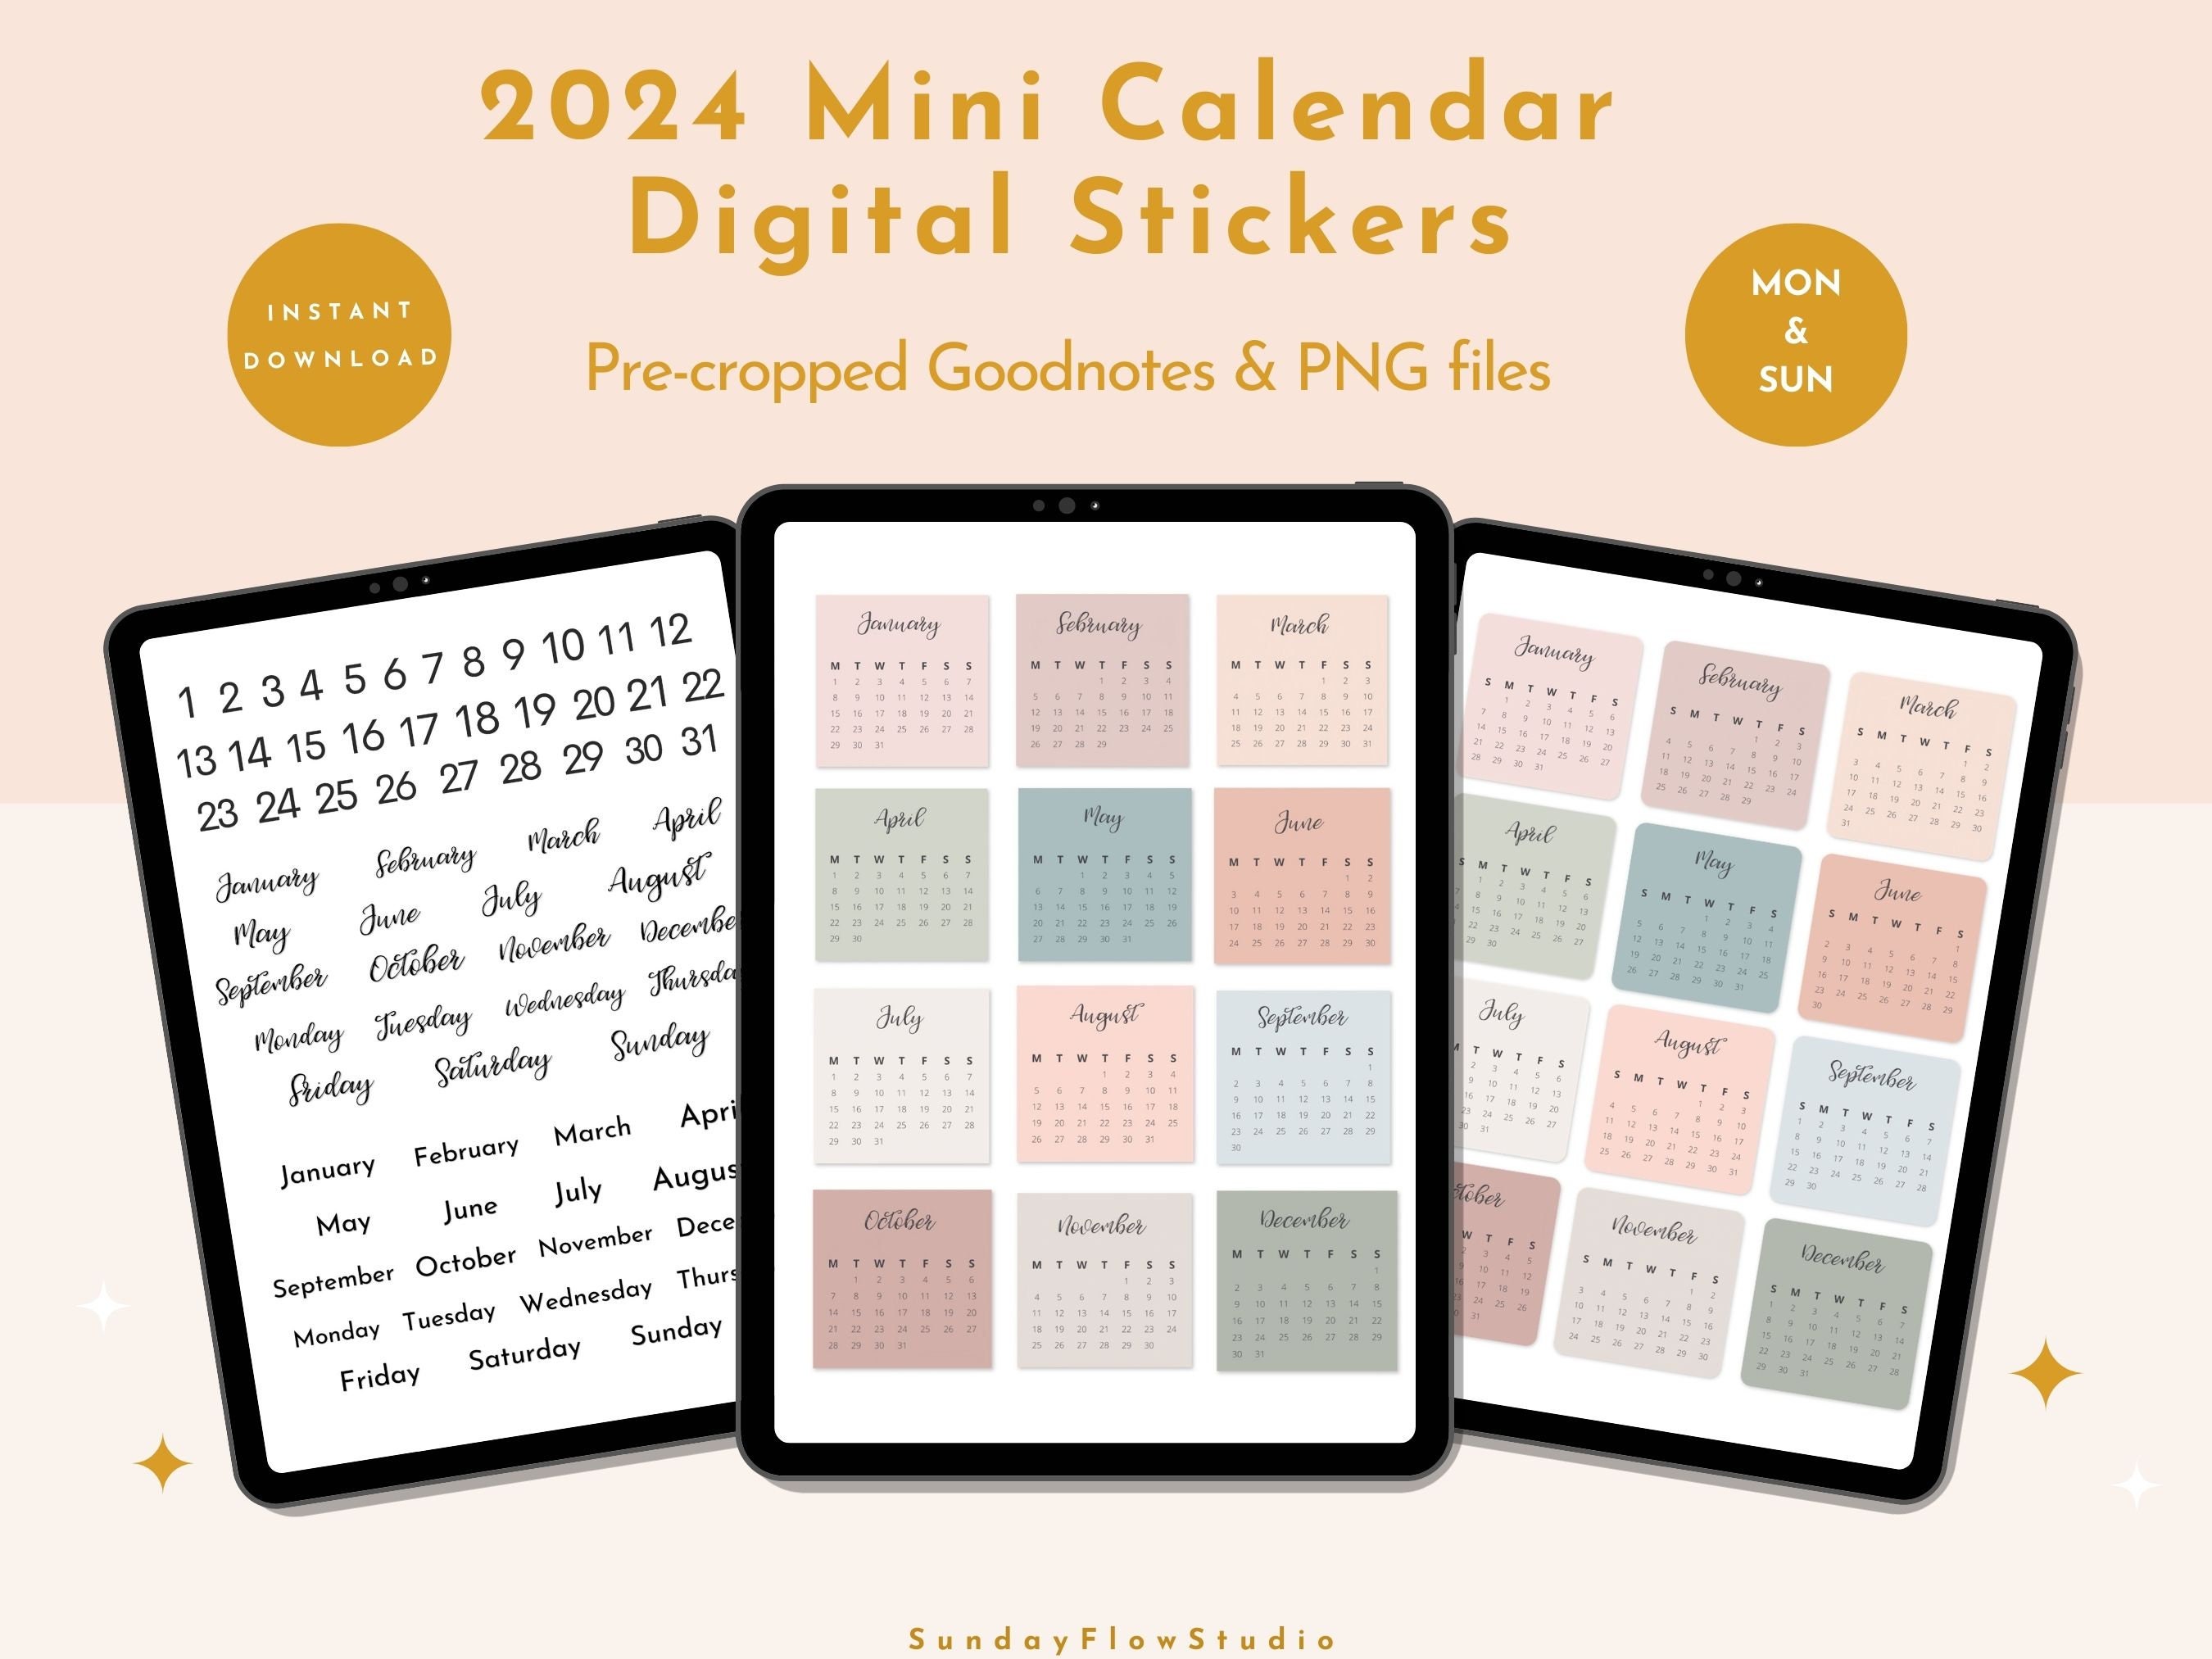 DOODLE-23- 26, HOLIDAY Planner Stickers - Standard + Mini Size (S-1569  S-1570)